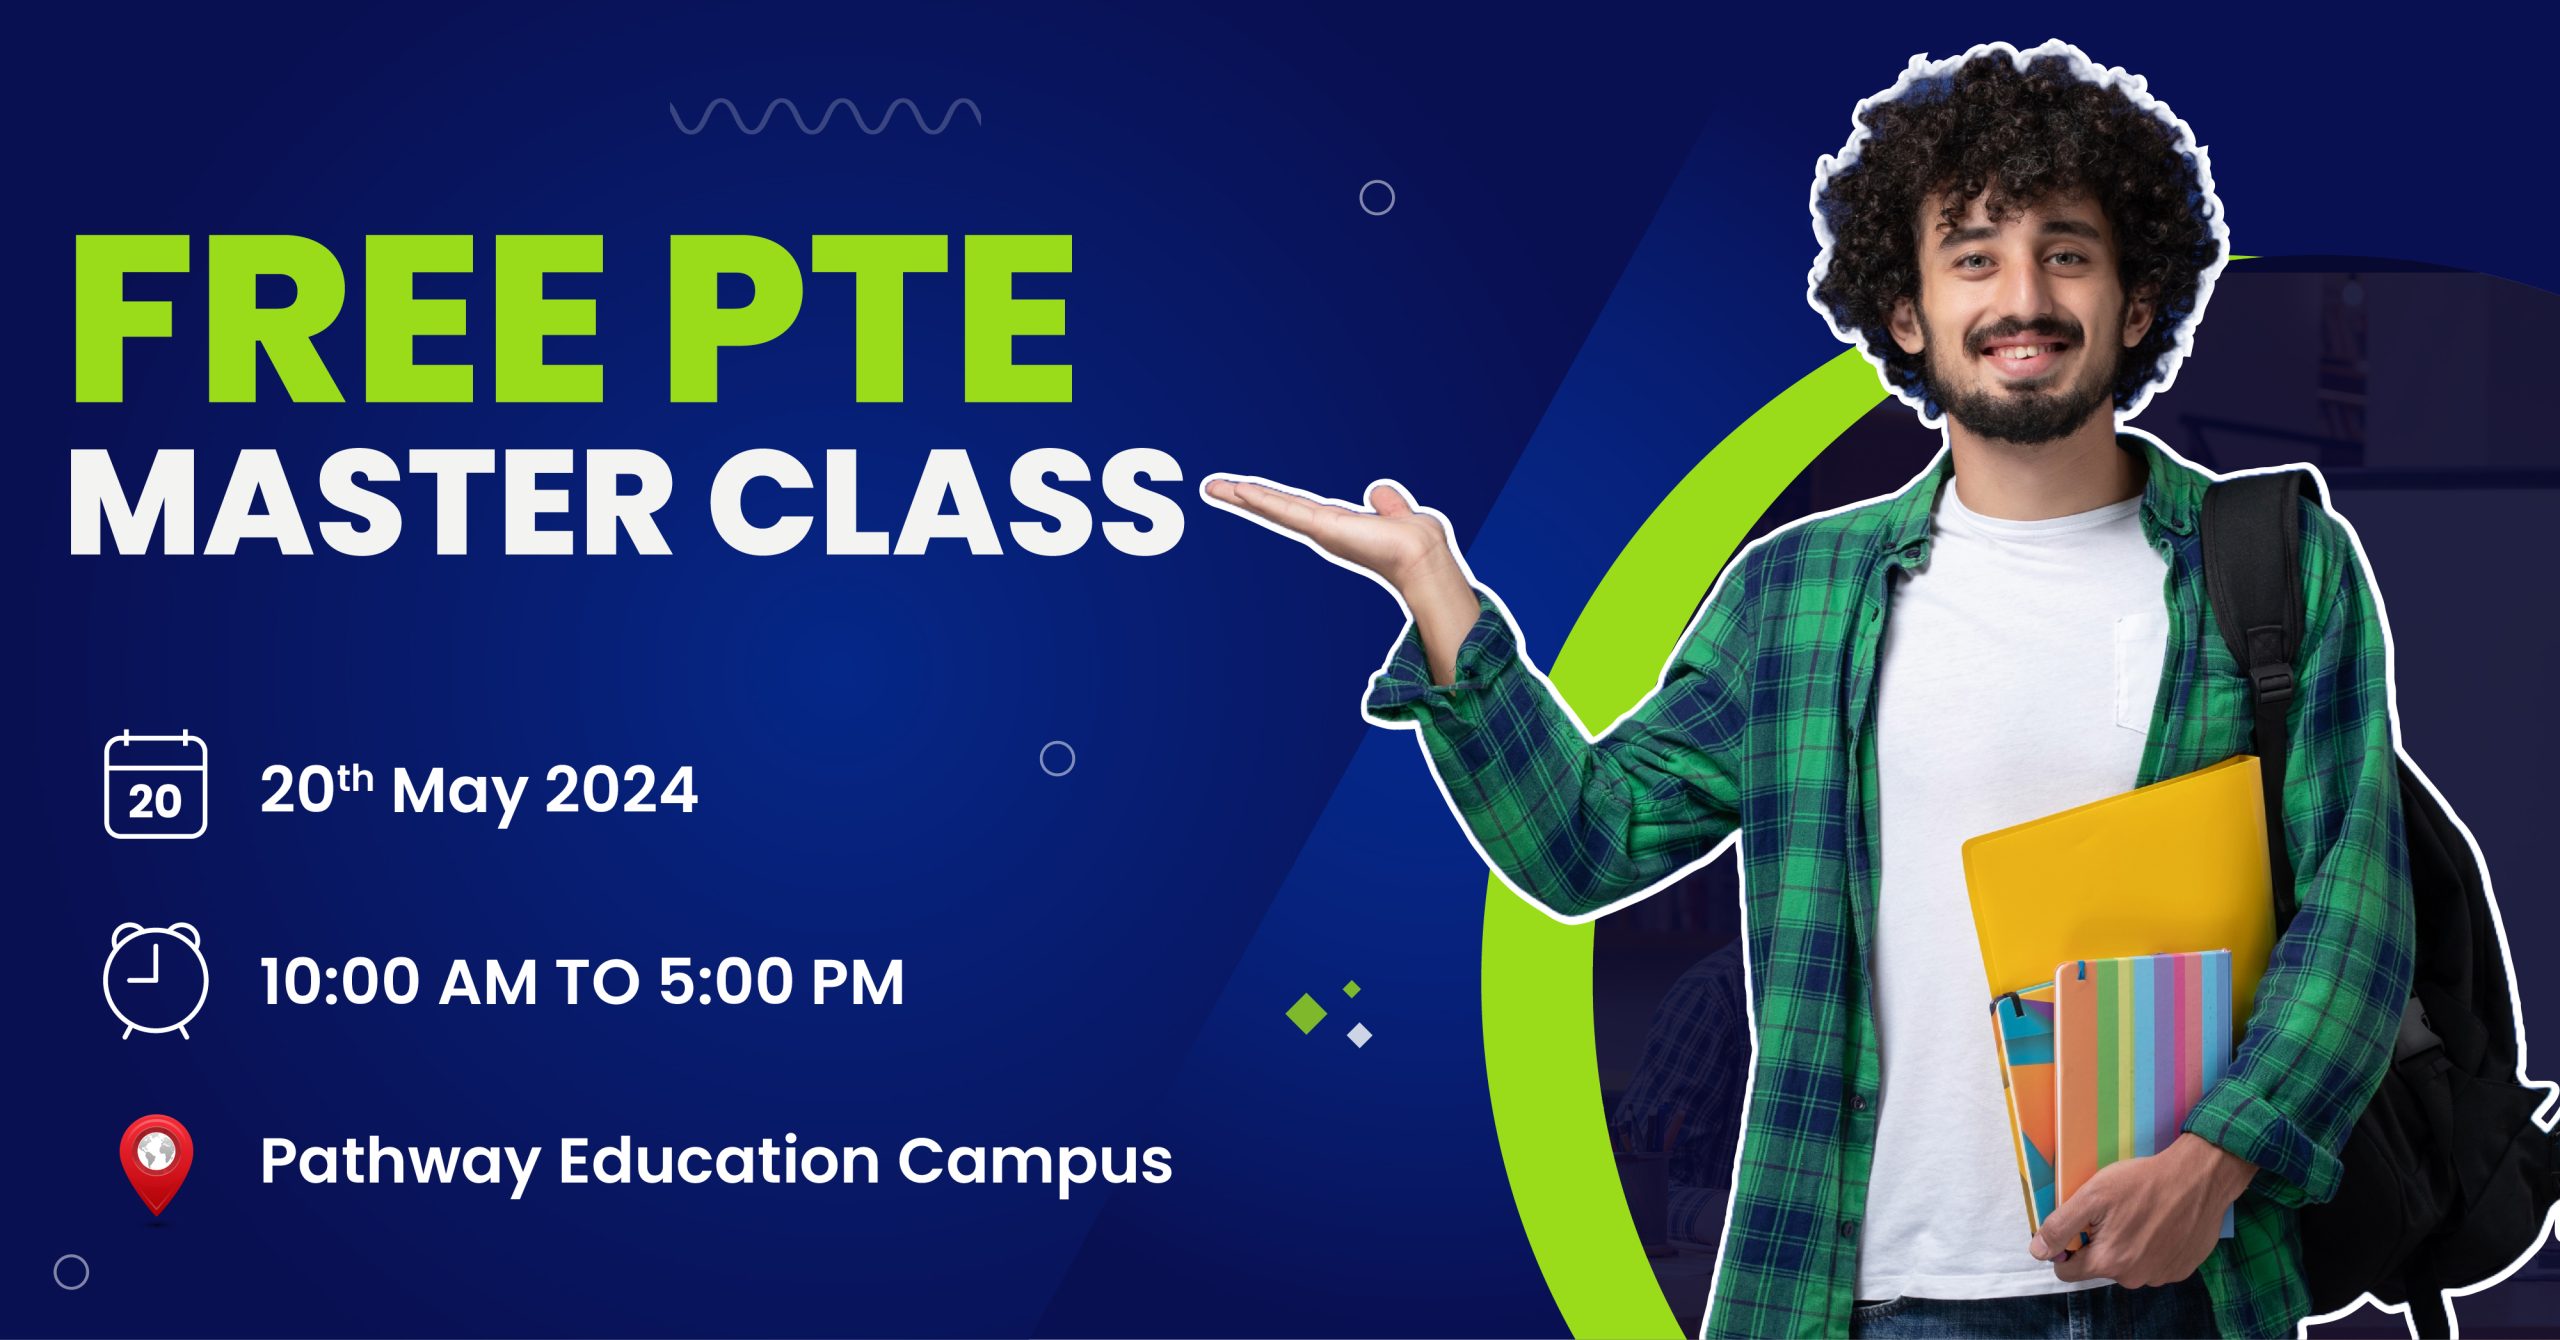 Free PTE Master Class at Pathway education